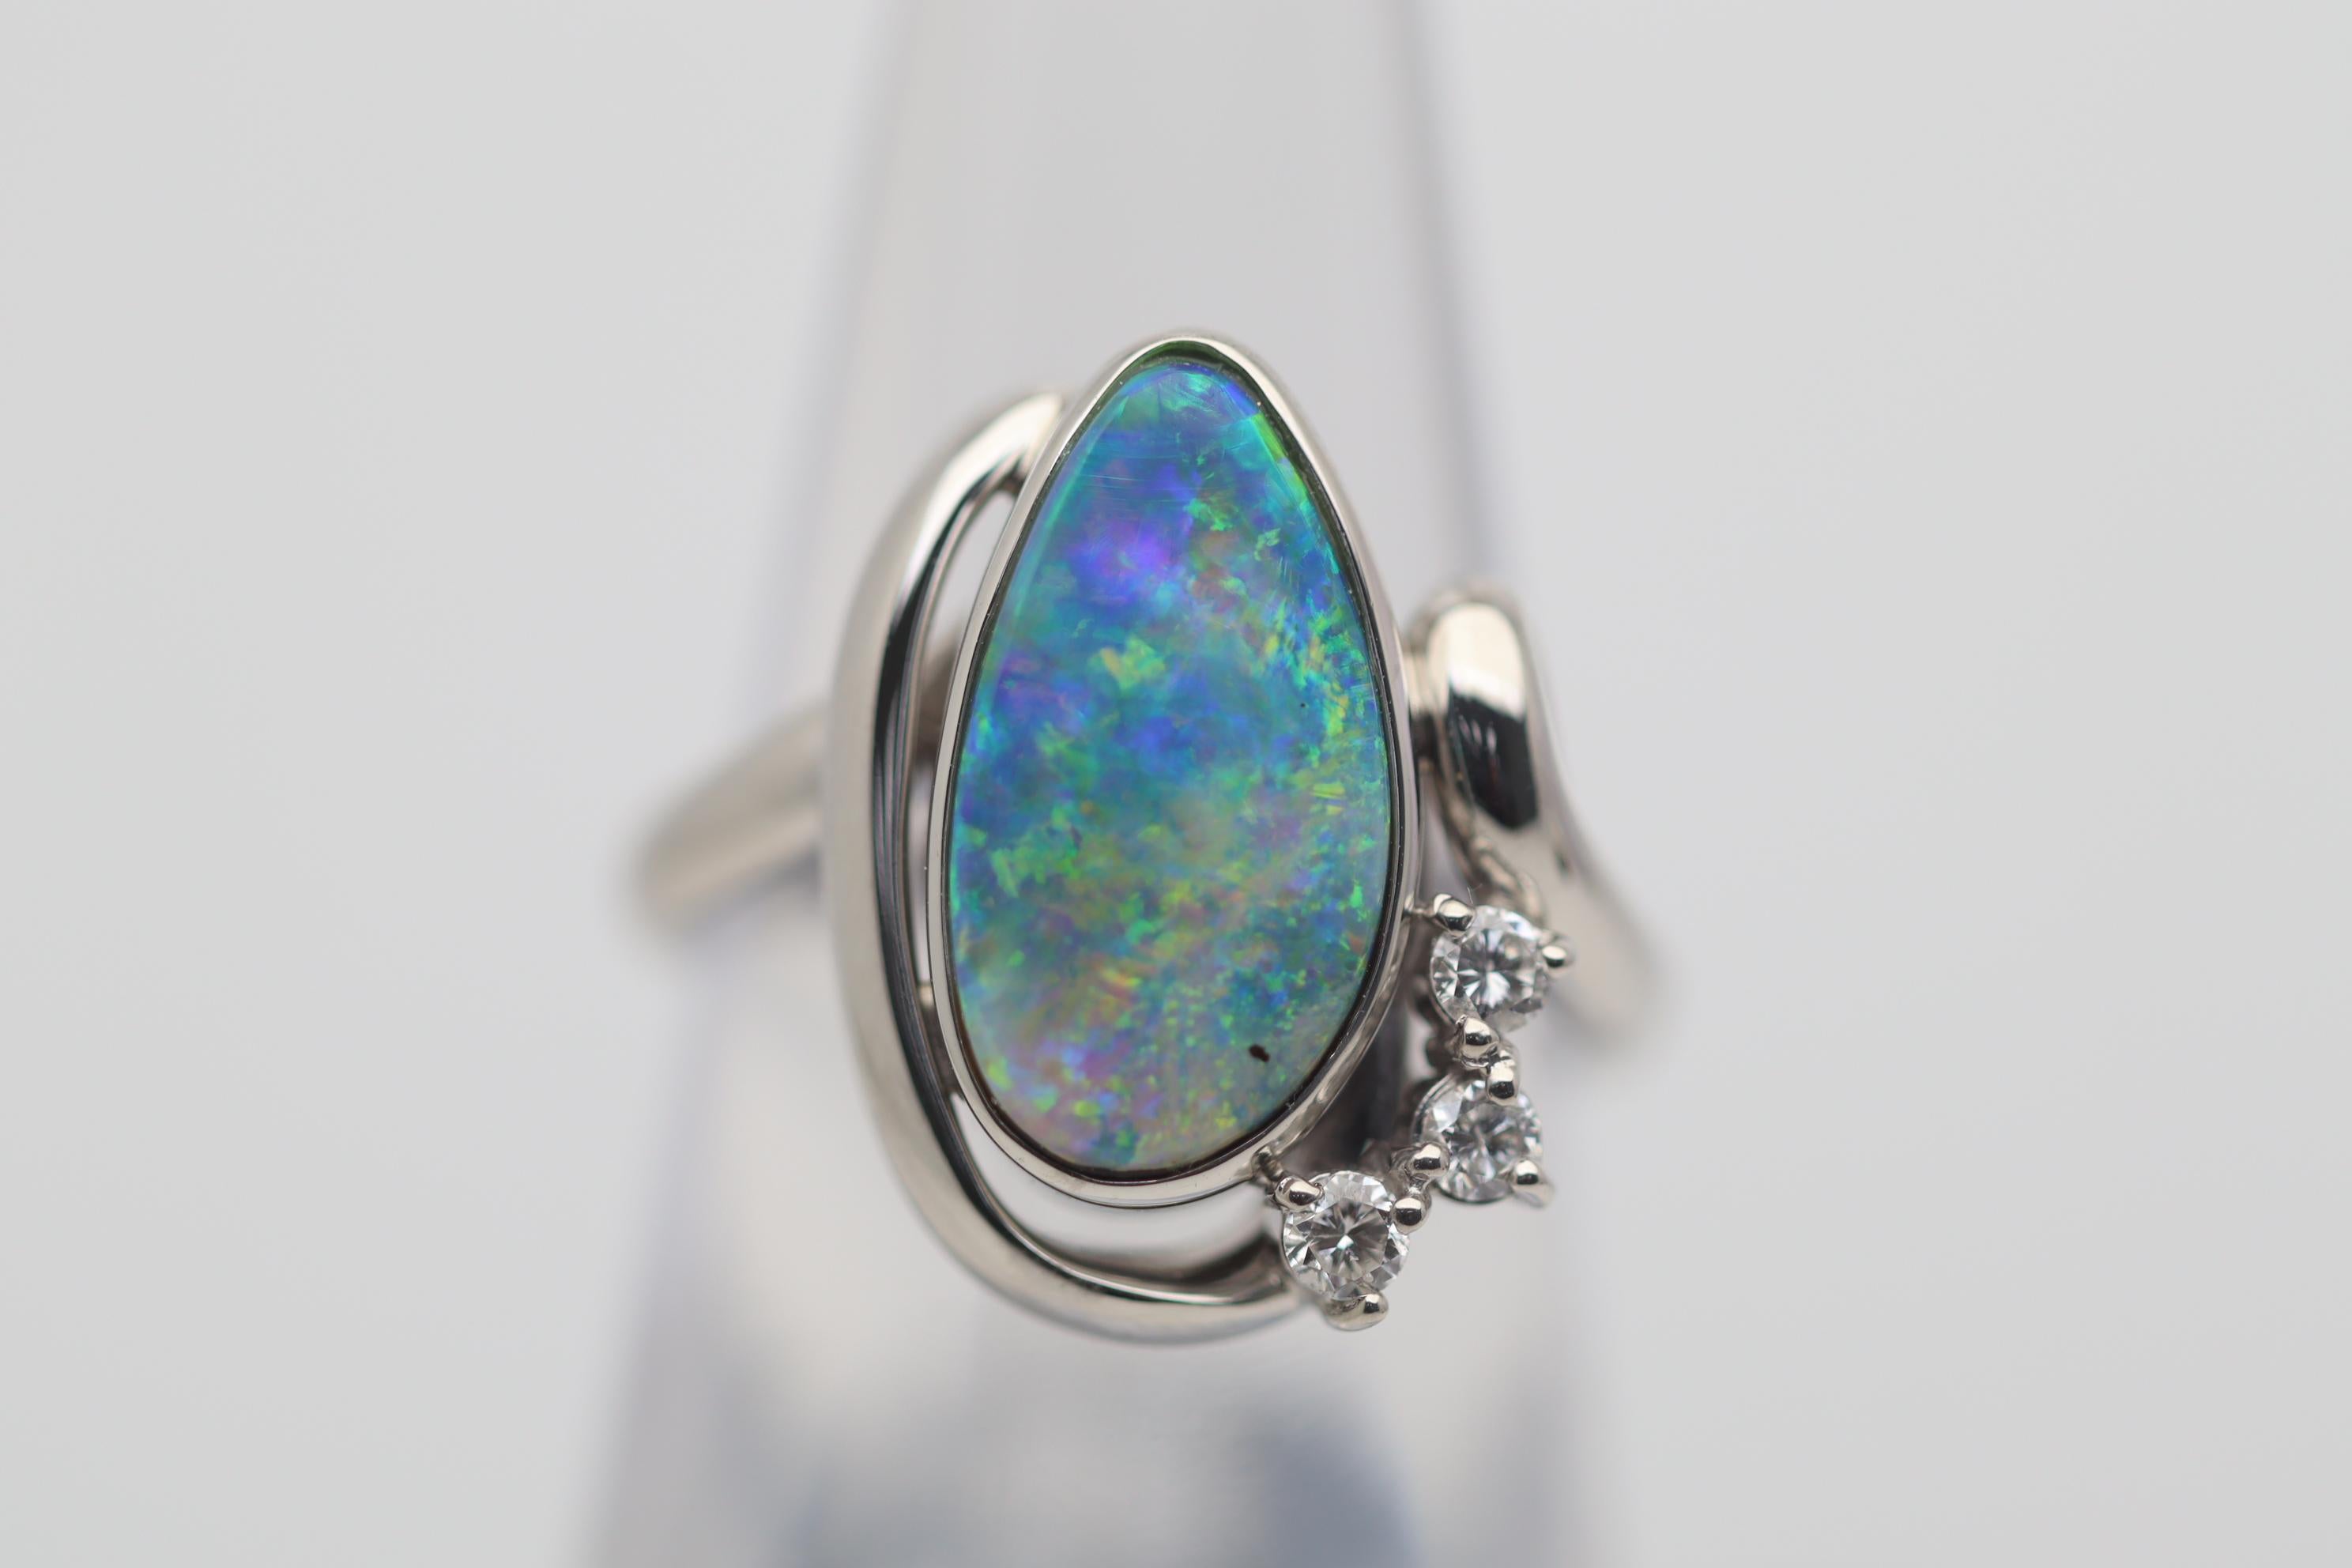 A fine boulder opal from Australia with excellent play-of-color. The 3.85 carat gem opal shows a bright array of greens, blues, yellows, and some oranges. It is complemented by 3 round brilliant-cut diamonds weighing 0.09 carats. Hand-fabricated in